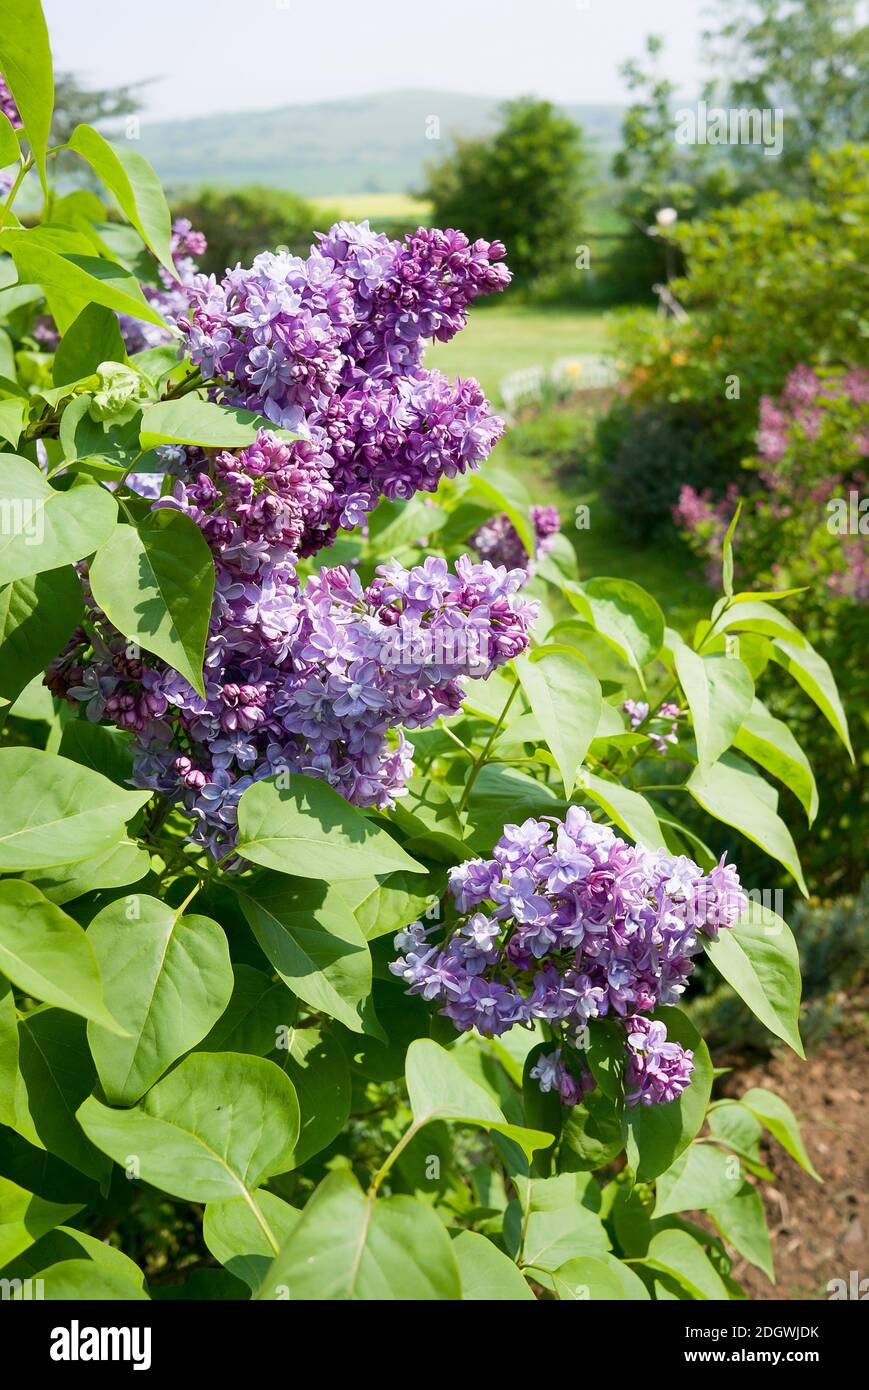 Fragrant Syringa x hyacinthiflora 'Esther Staley flowering in a rural English garden in April Stock Photo